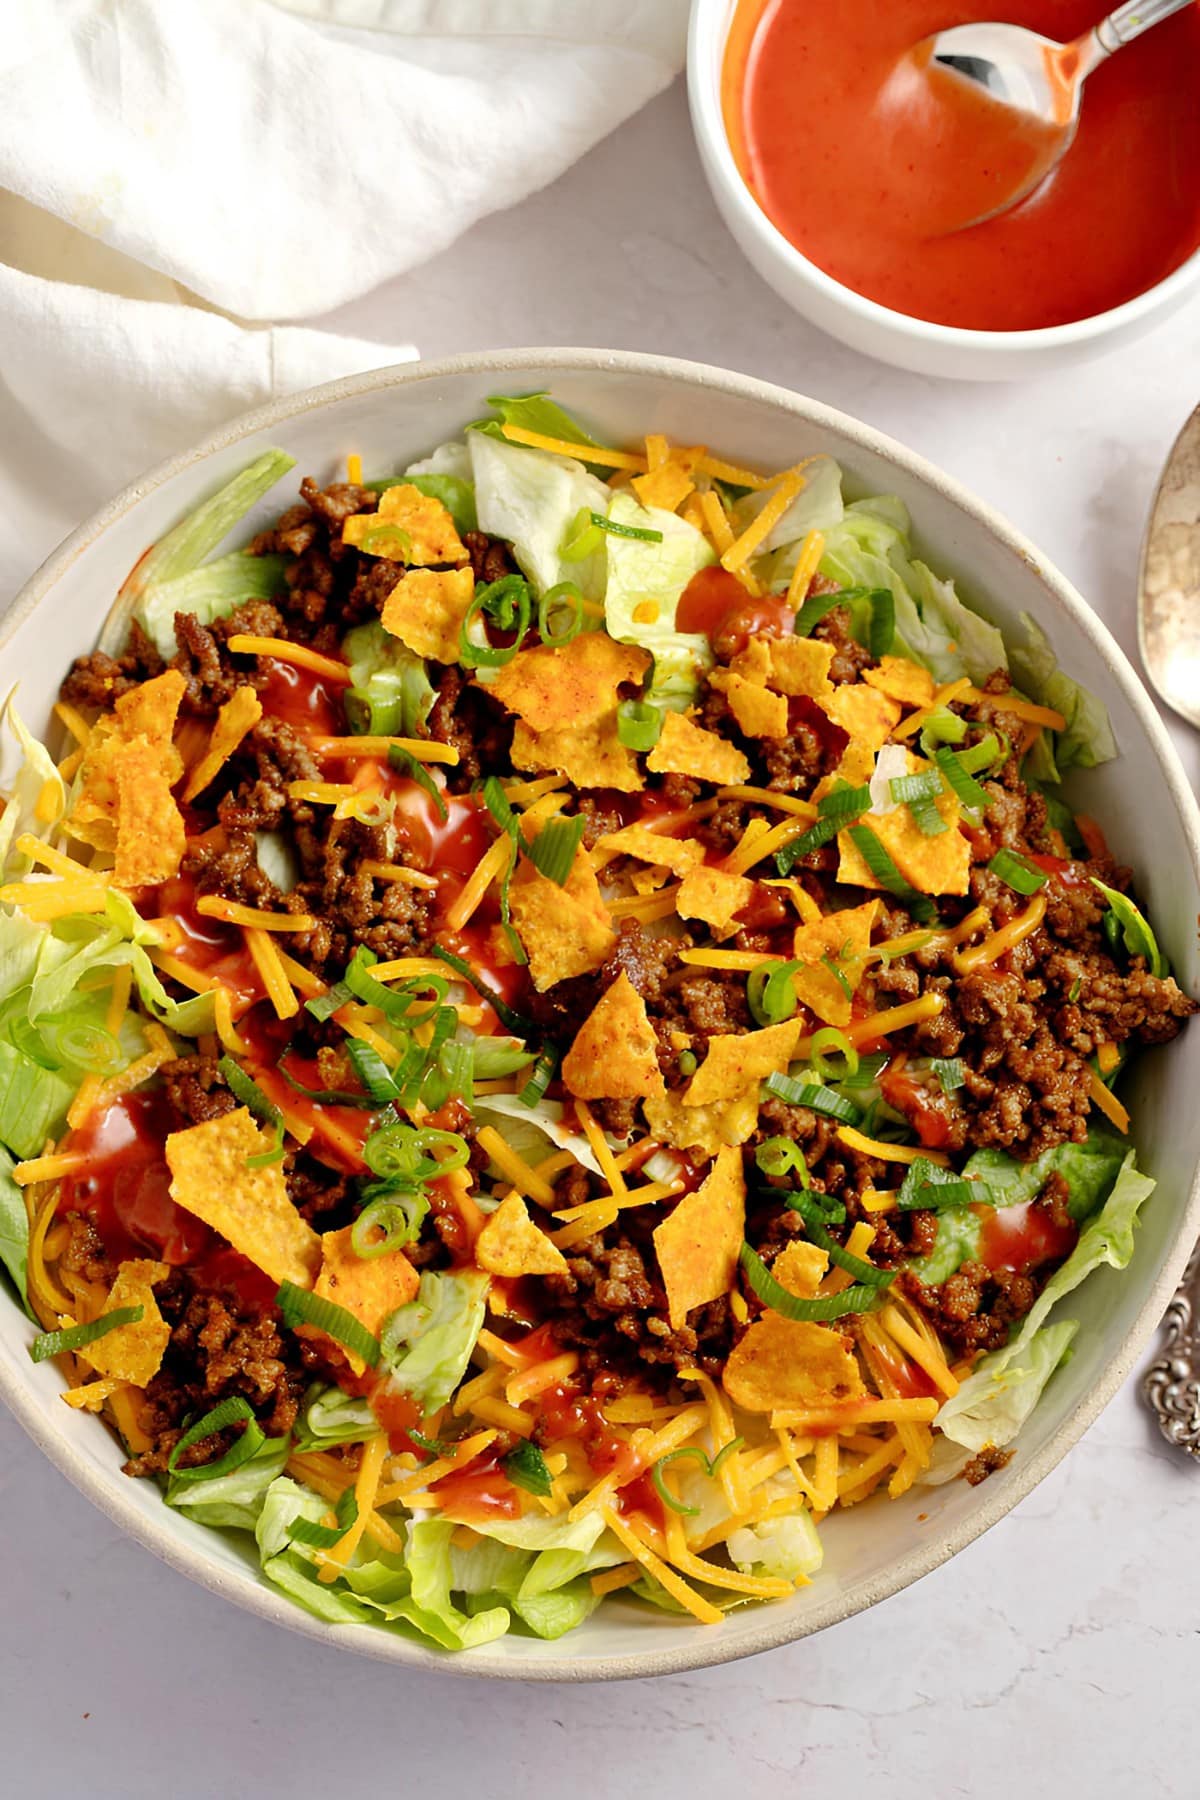 Taco Salad with Ground Beef and Nacho Tortilla Chips